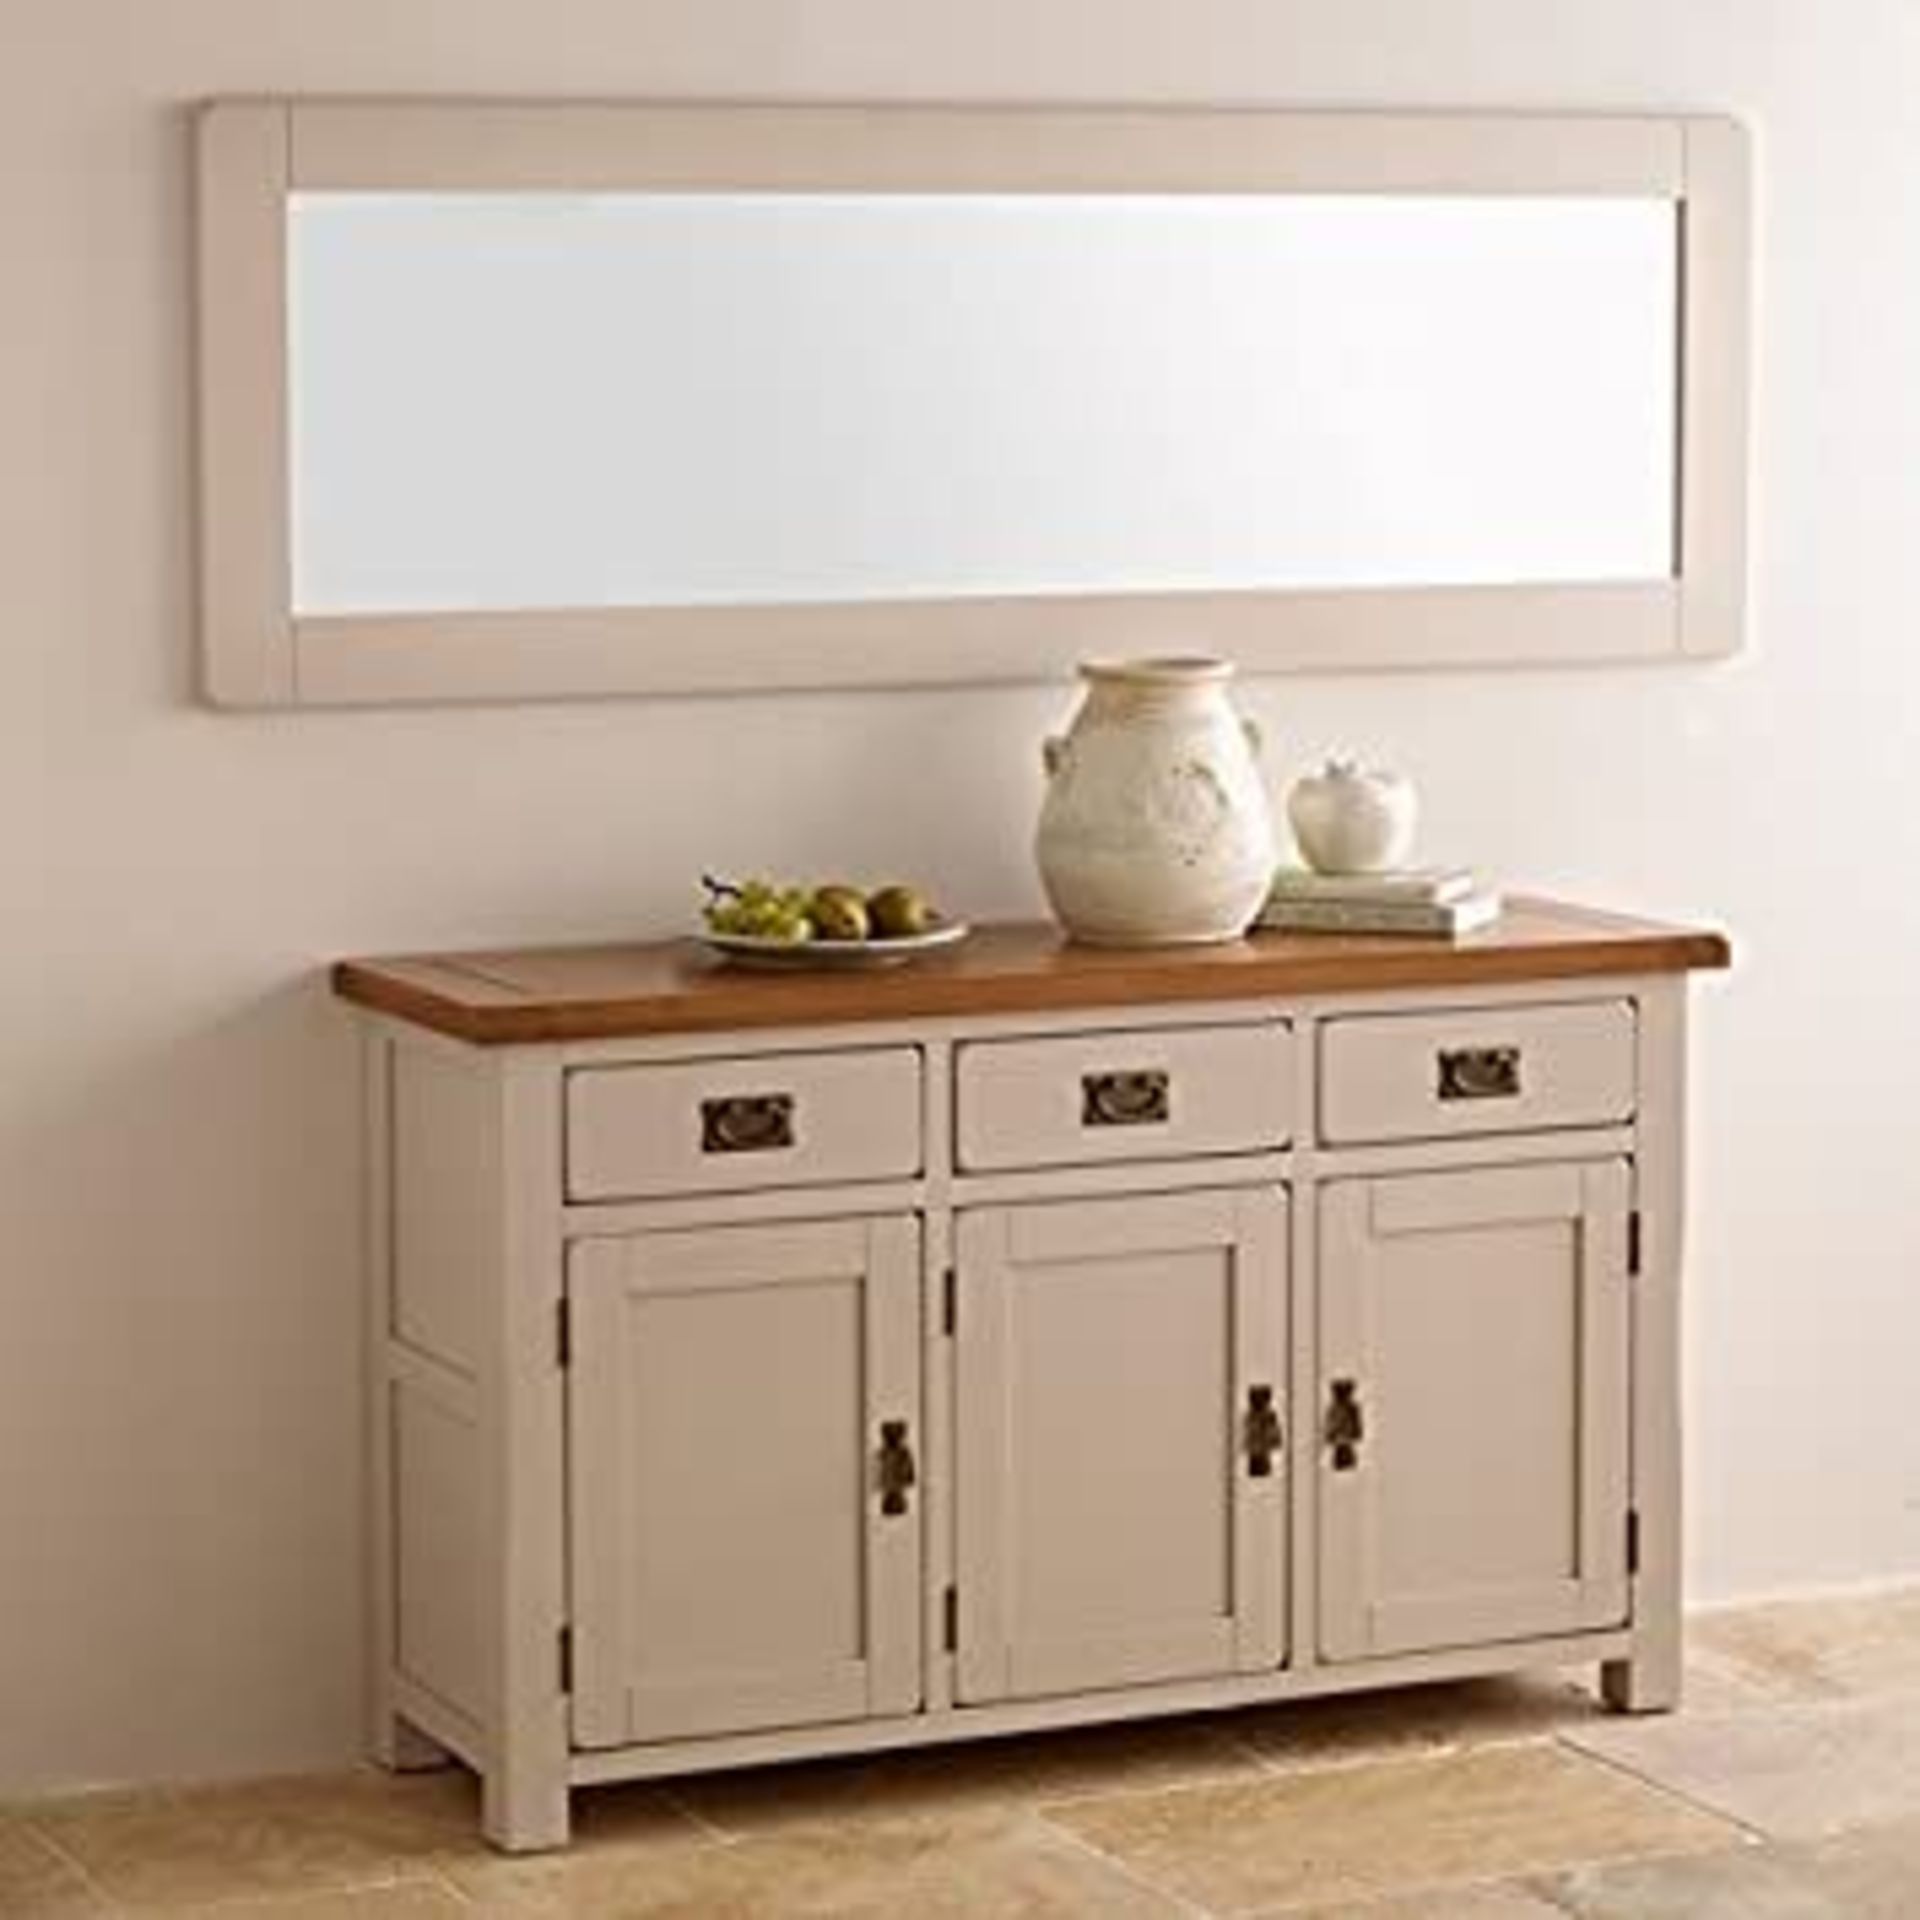 NEW BOXED KEMBLE RUSTIC SOLID OAK & PAINTED WALL MIRROR. 1800x600MM. RRP £300. 100% OAK, REAL WOOD - Image 2 of 2